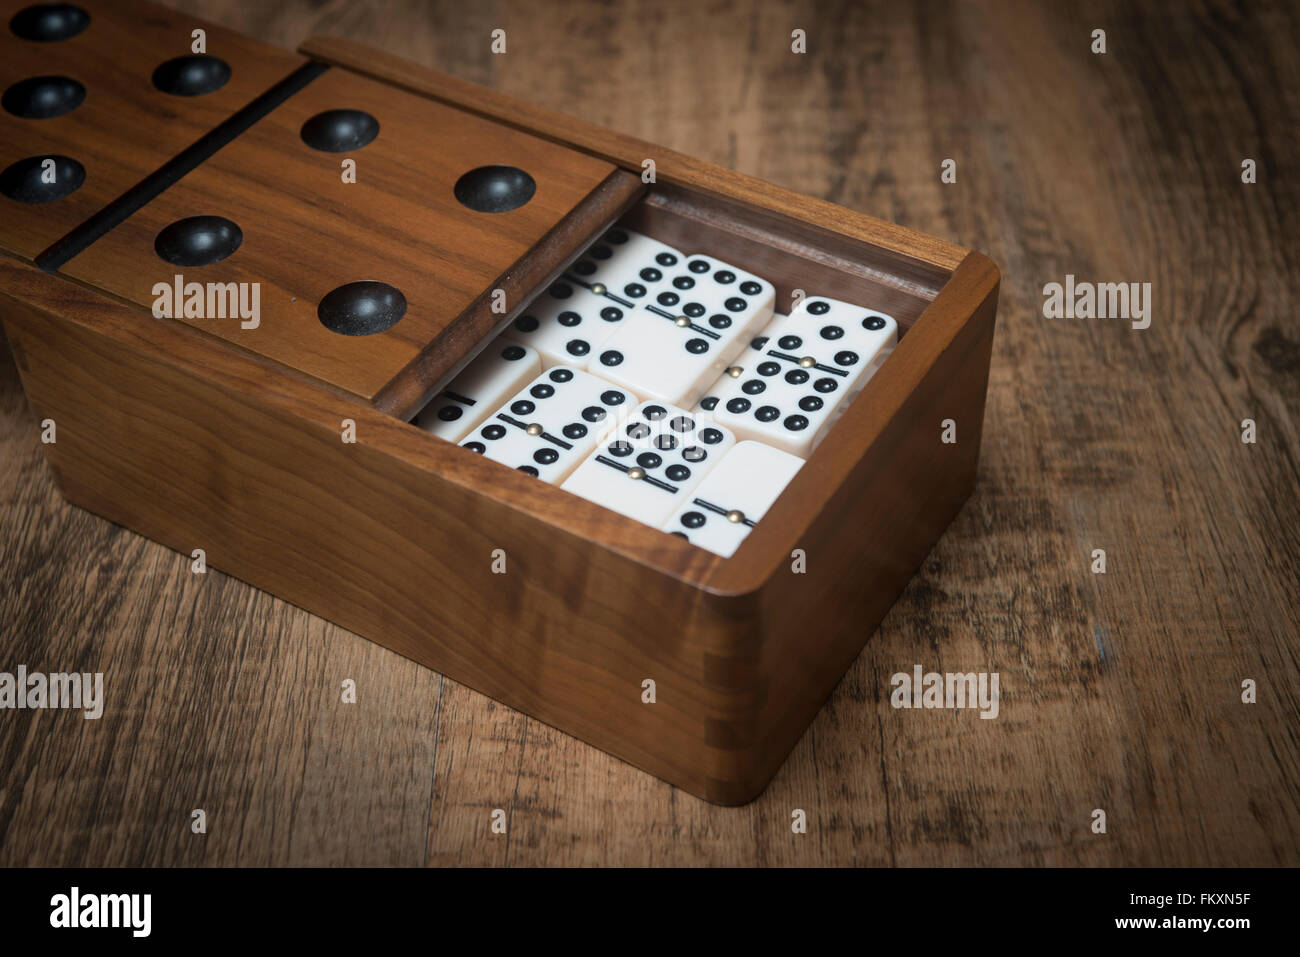 Set of dominos in a wooden box Stock Photo